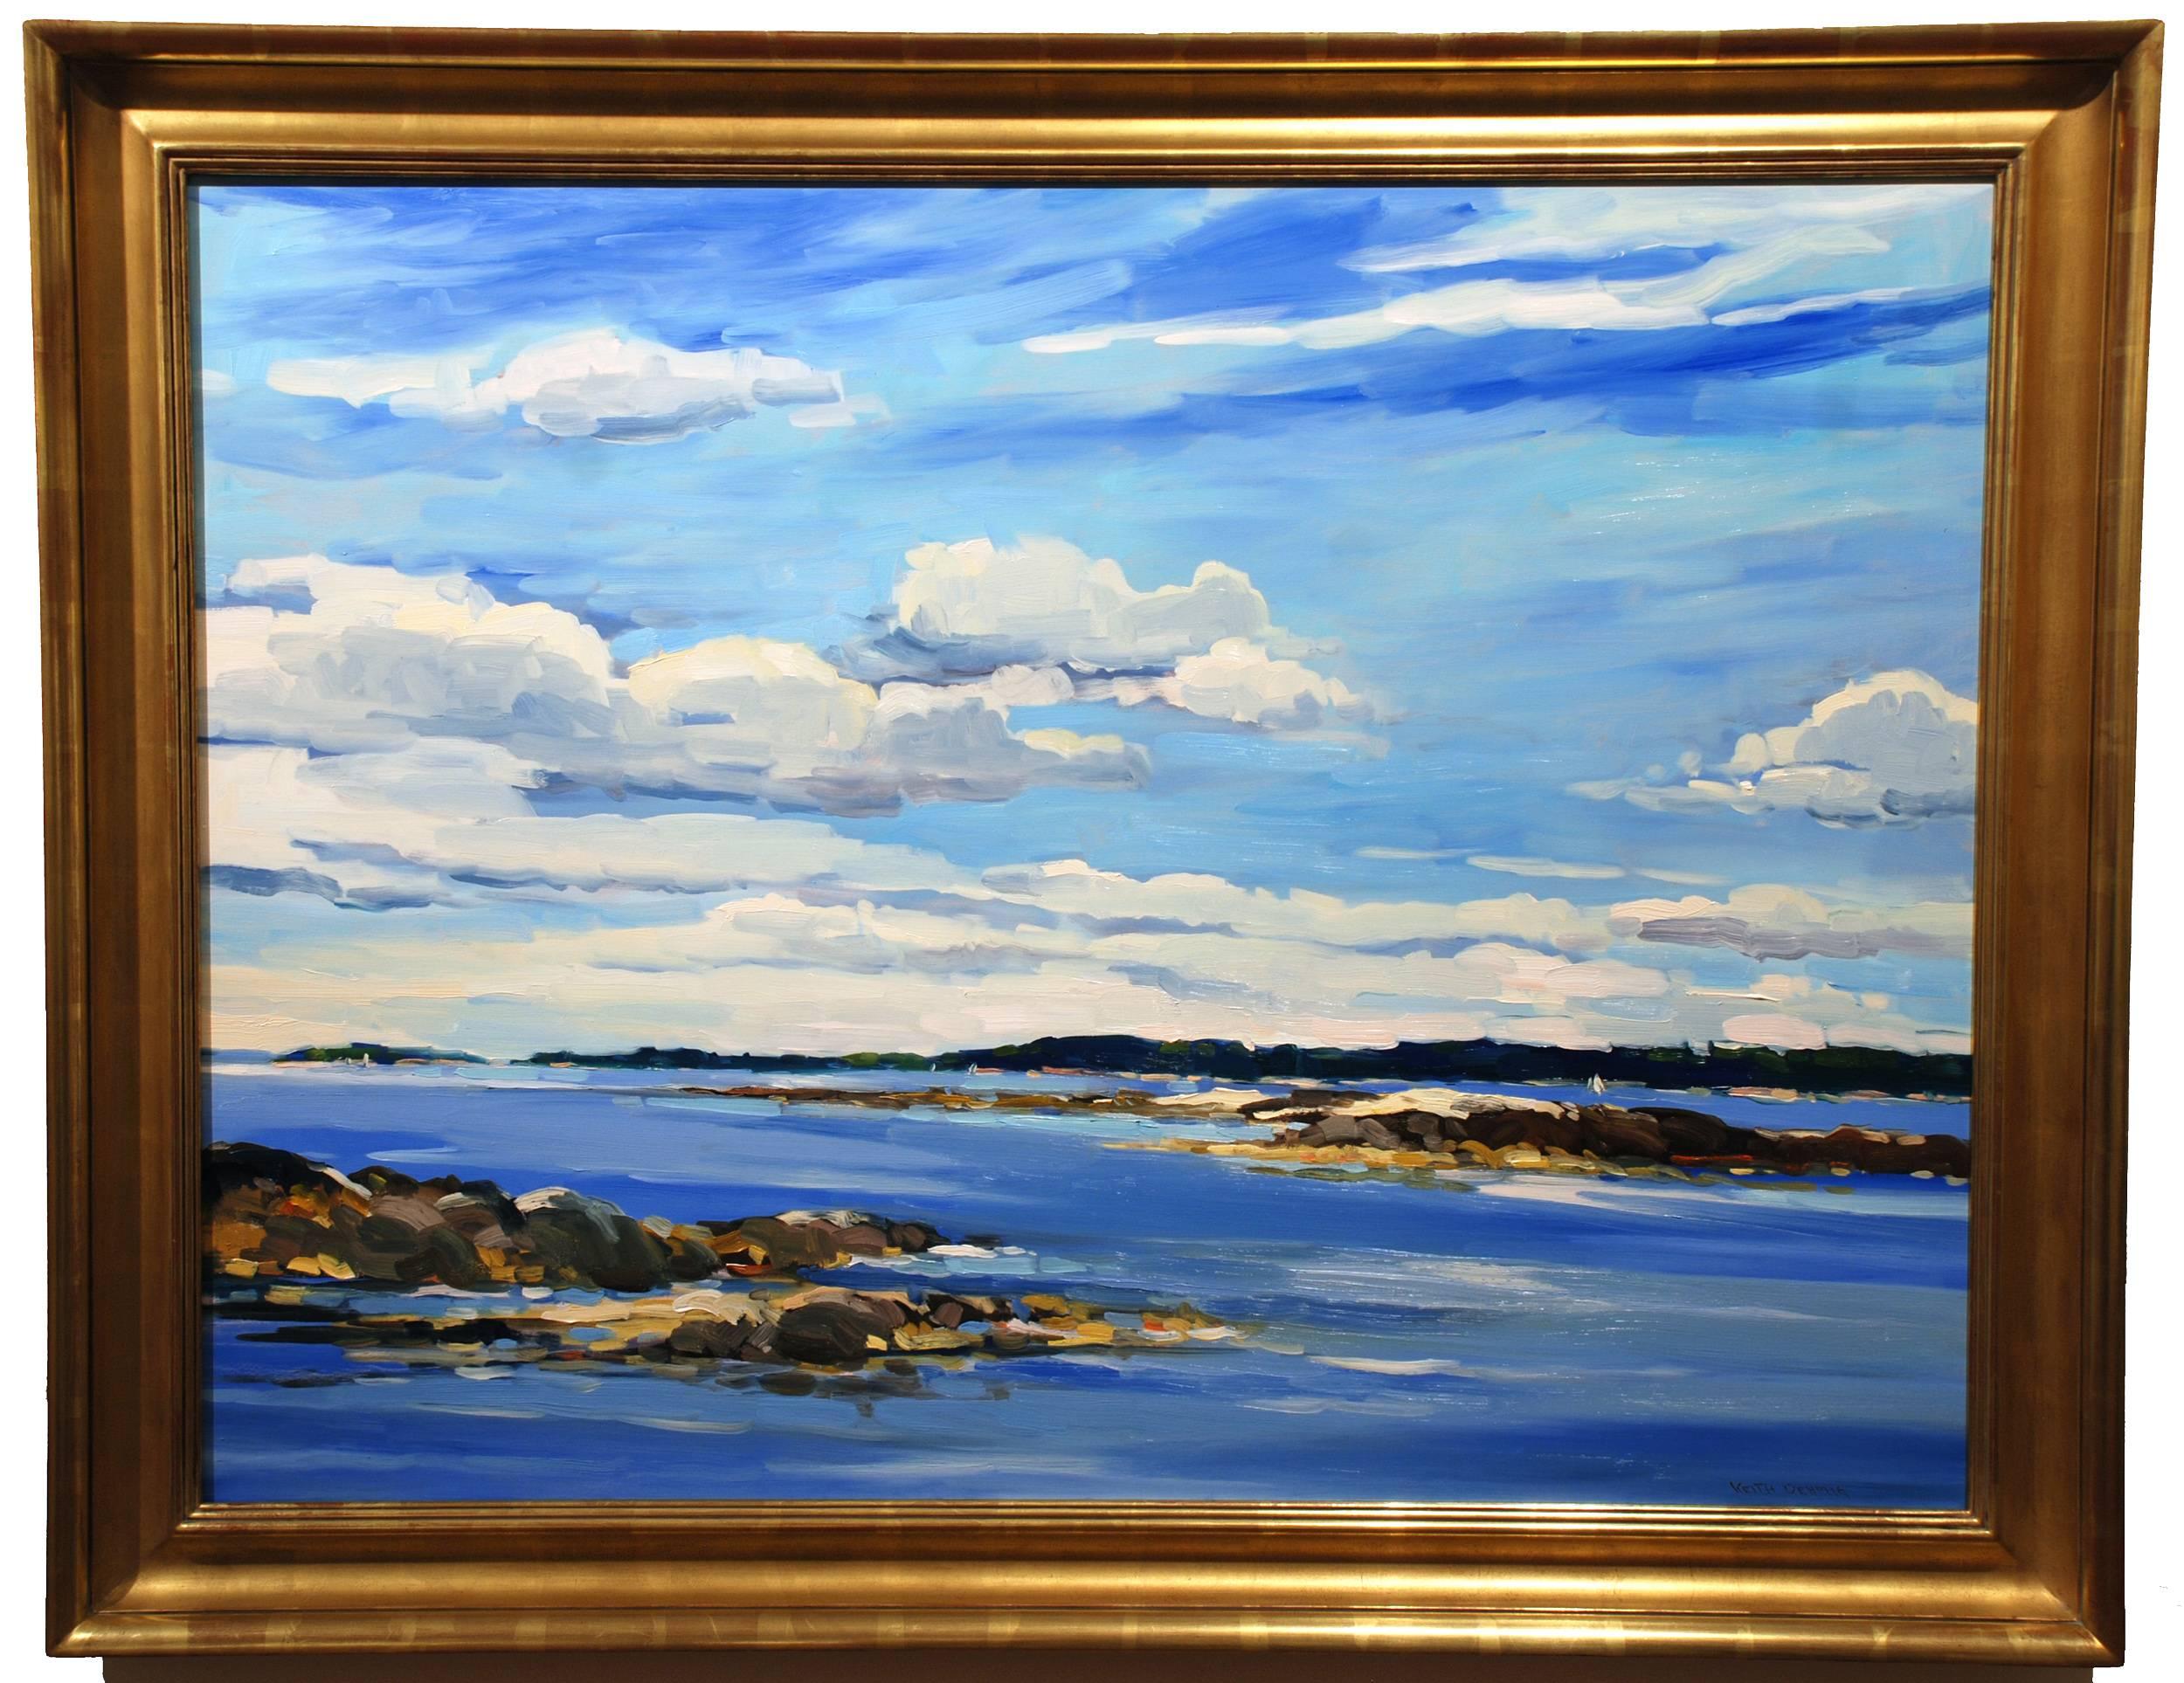 September Skies, Middle Bay - Painting by Keith Oehmig